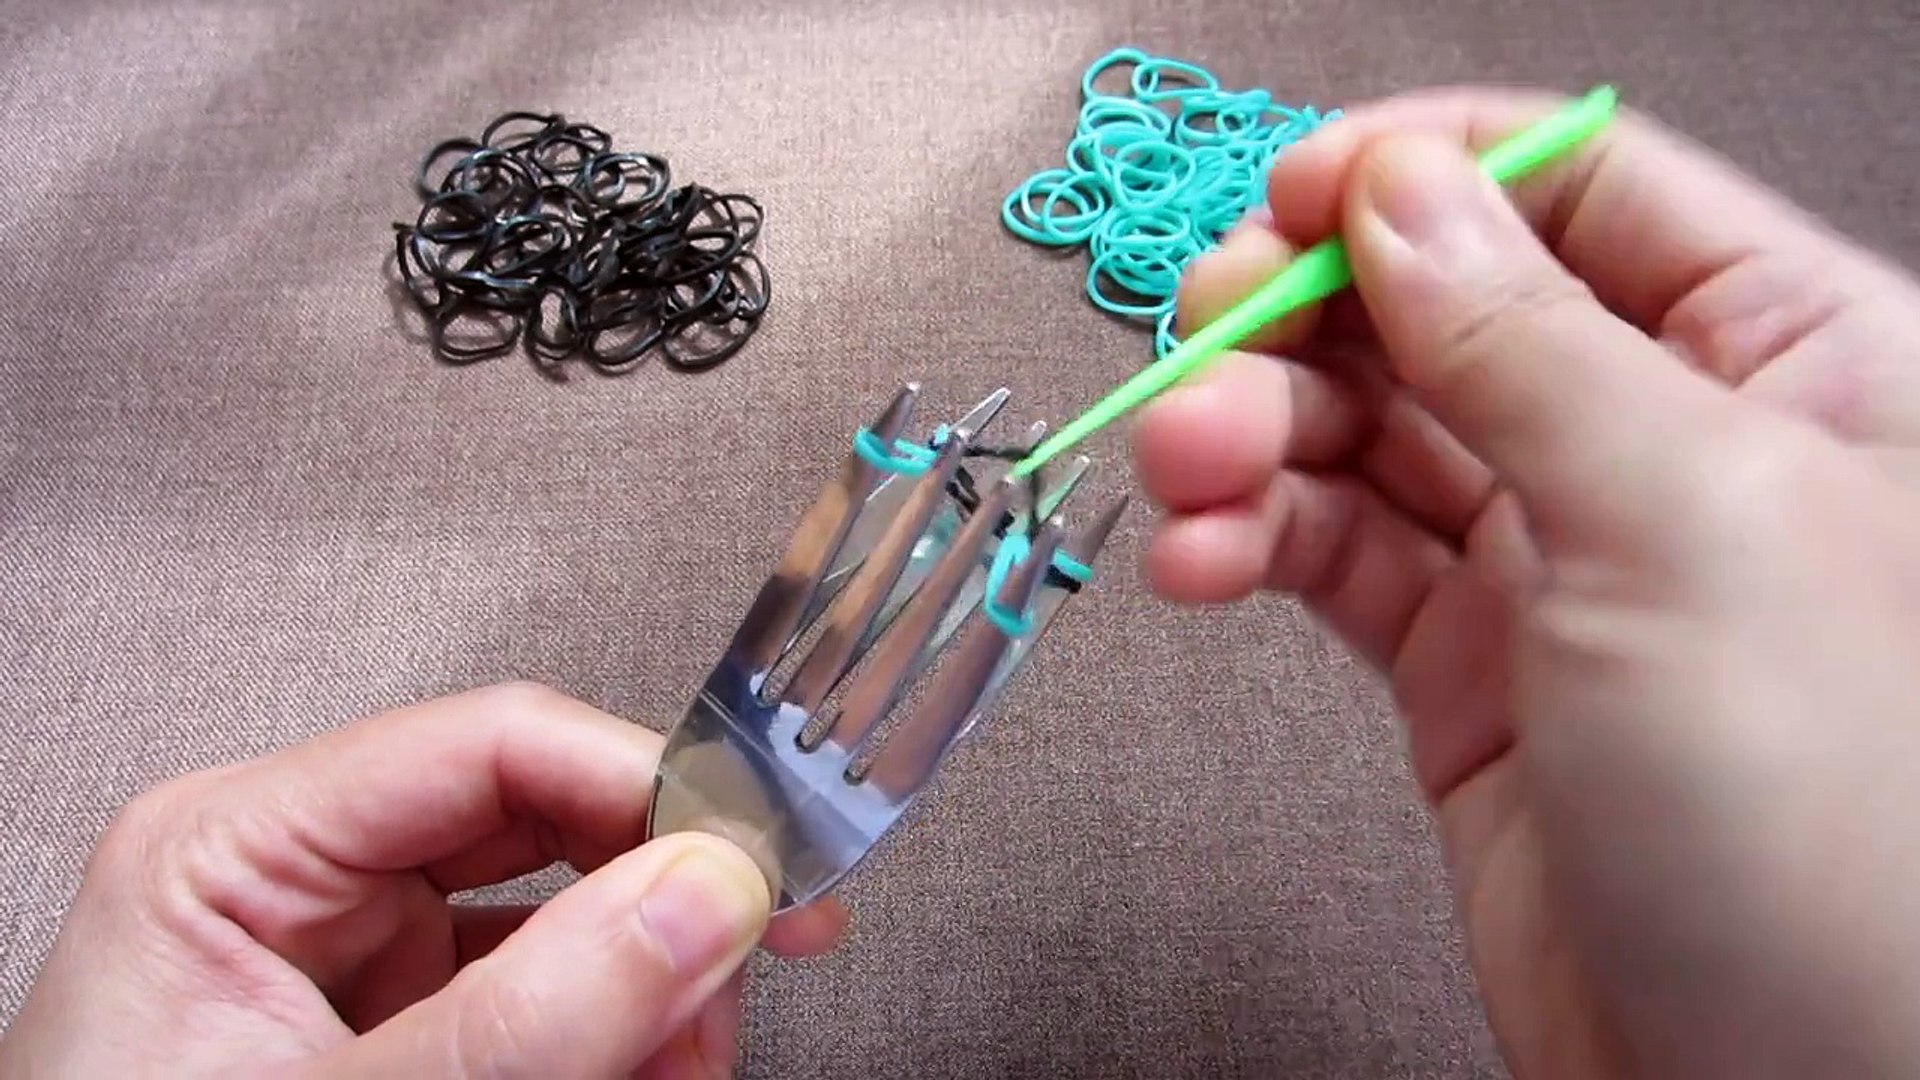 How to Make Loom Bands. 5 Easy Rainbow Loom Bracelet Designs without a Loom  - Rubber band Bracelets 